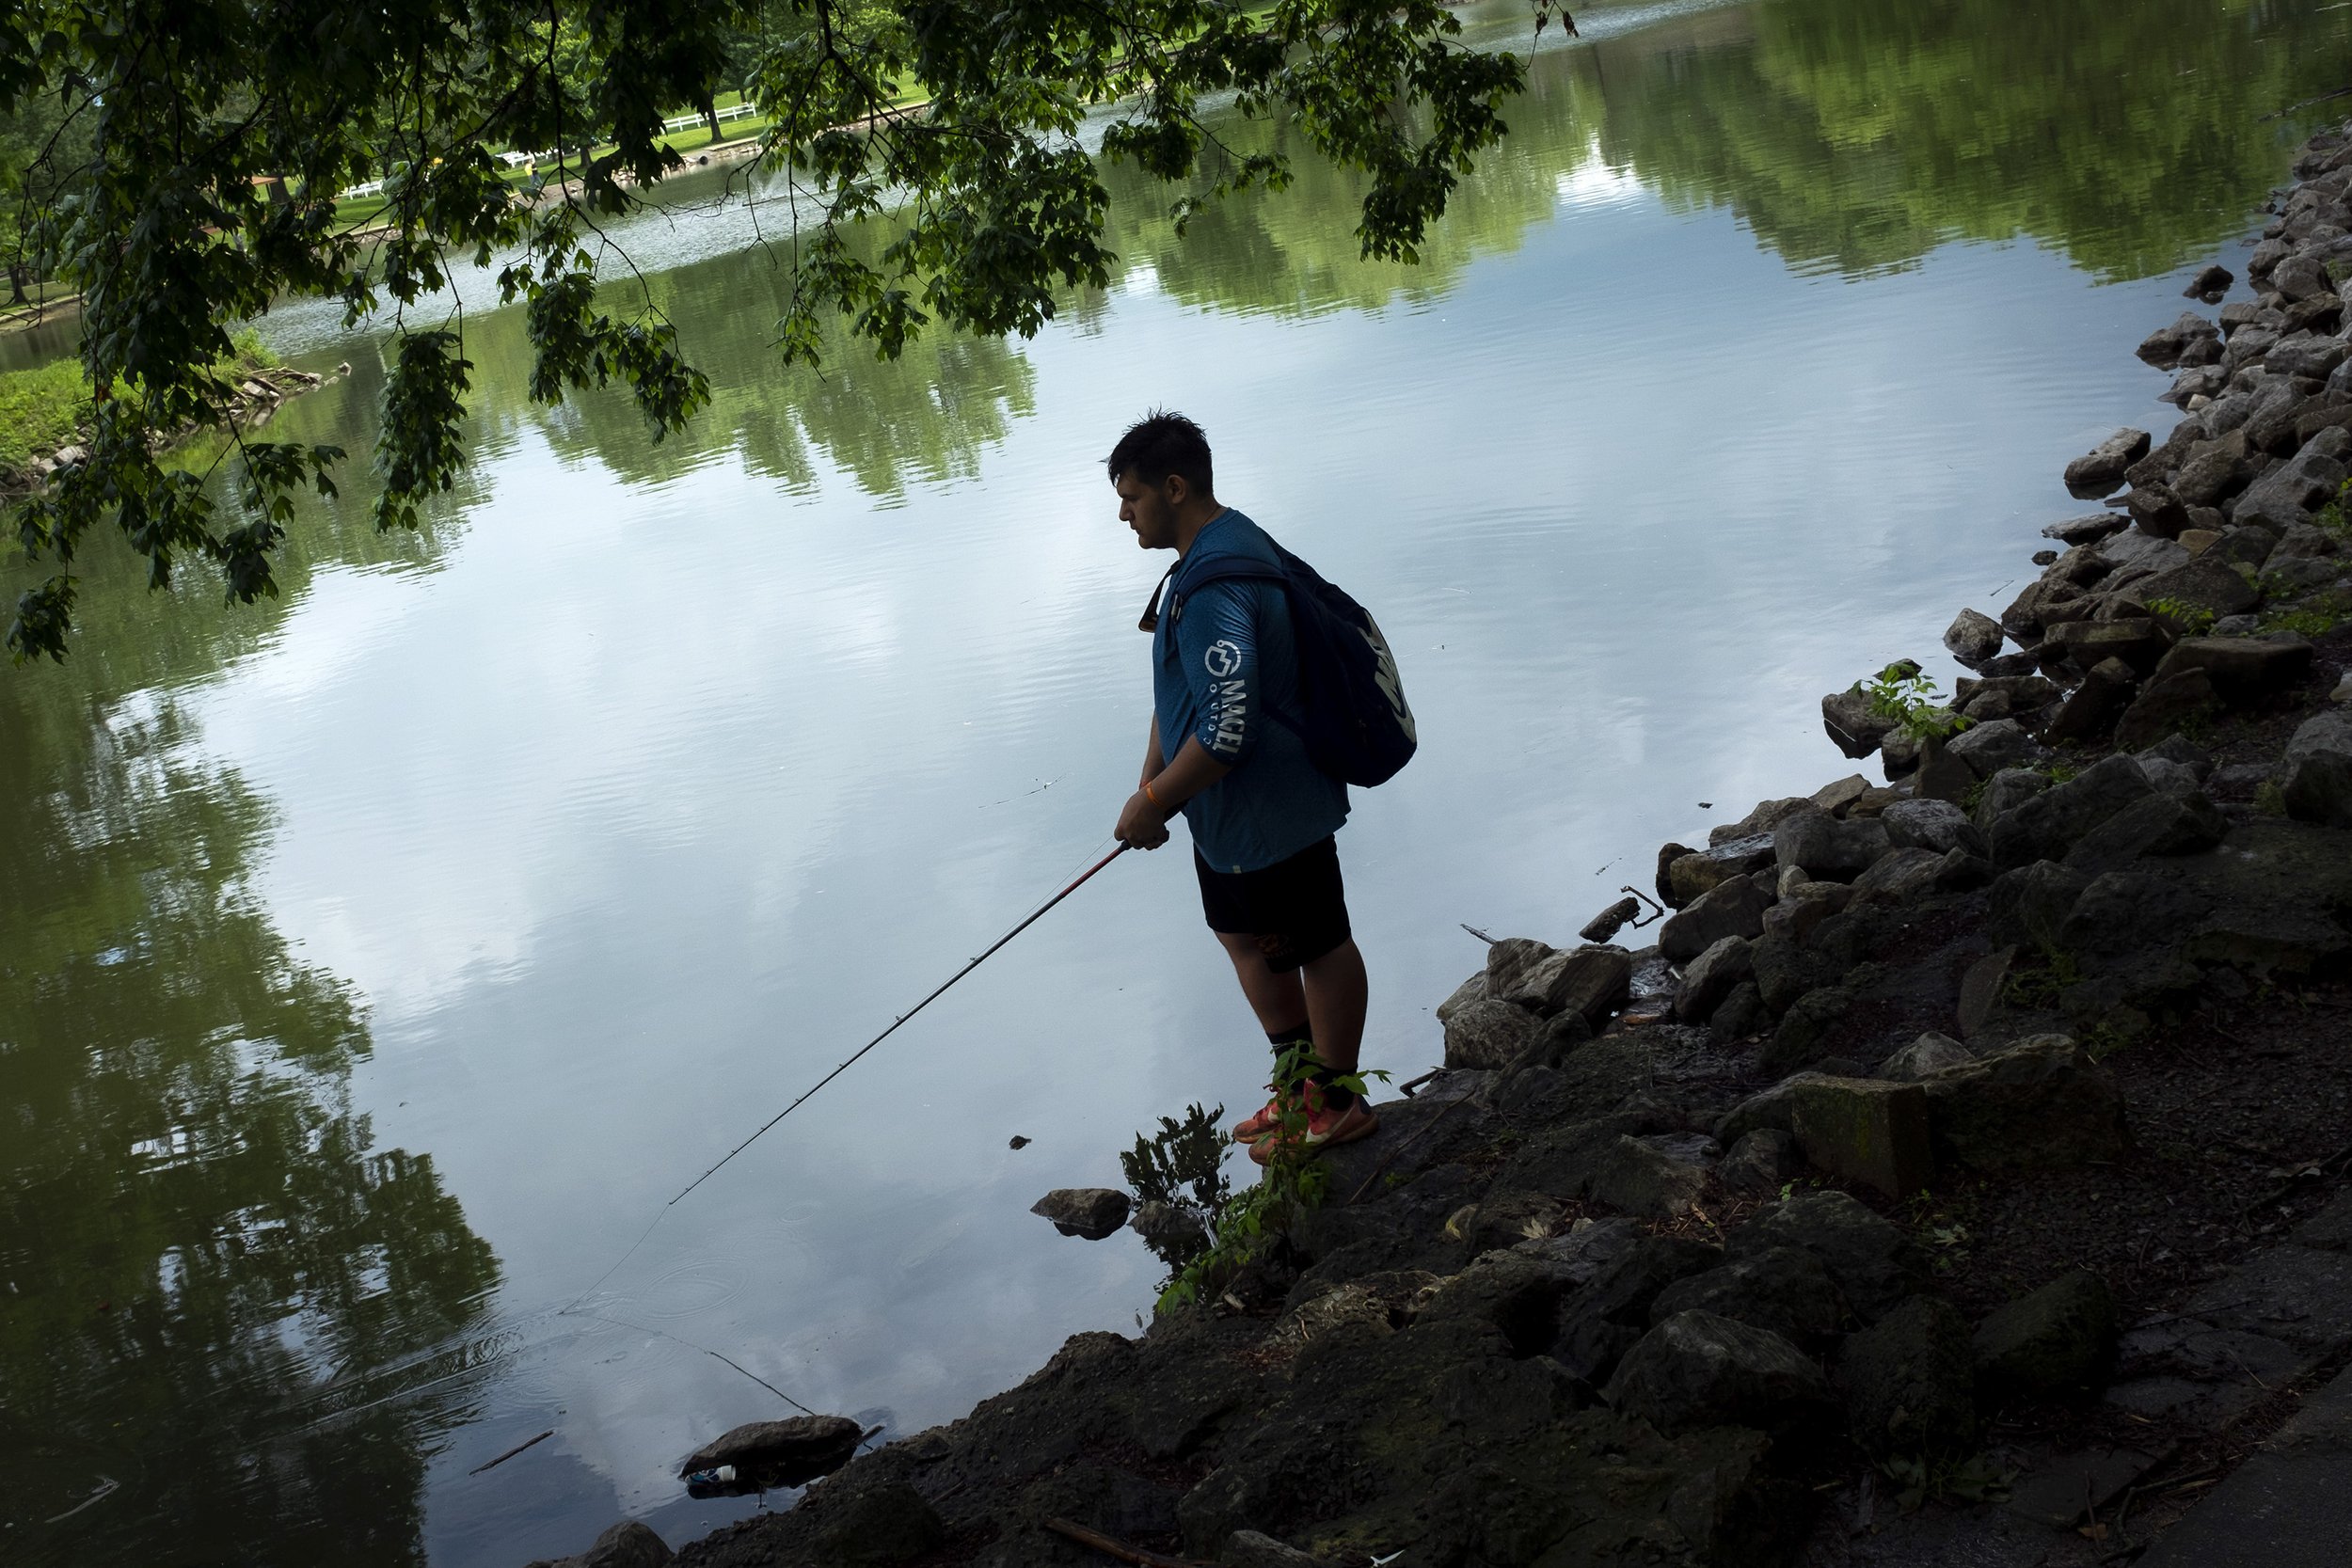  Tanner Mendoza, 17, of Cape Girardeau goes fishing May 27 at Capaha Park in Cape Girardeau. Mendoza said he tries to go fishing every day. "It's one of my favorite hobbies, that and football," Mendoza said. He said fishing is a stress reliever for h